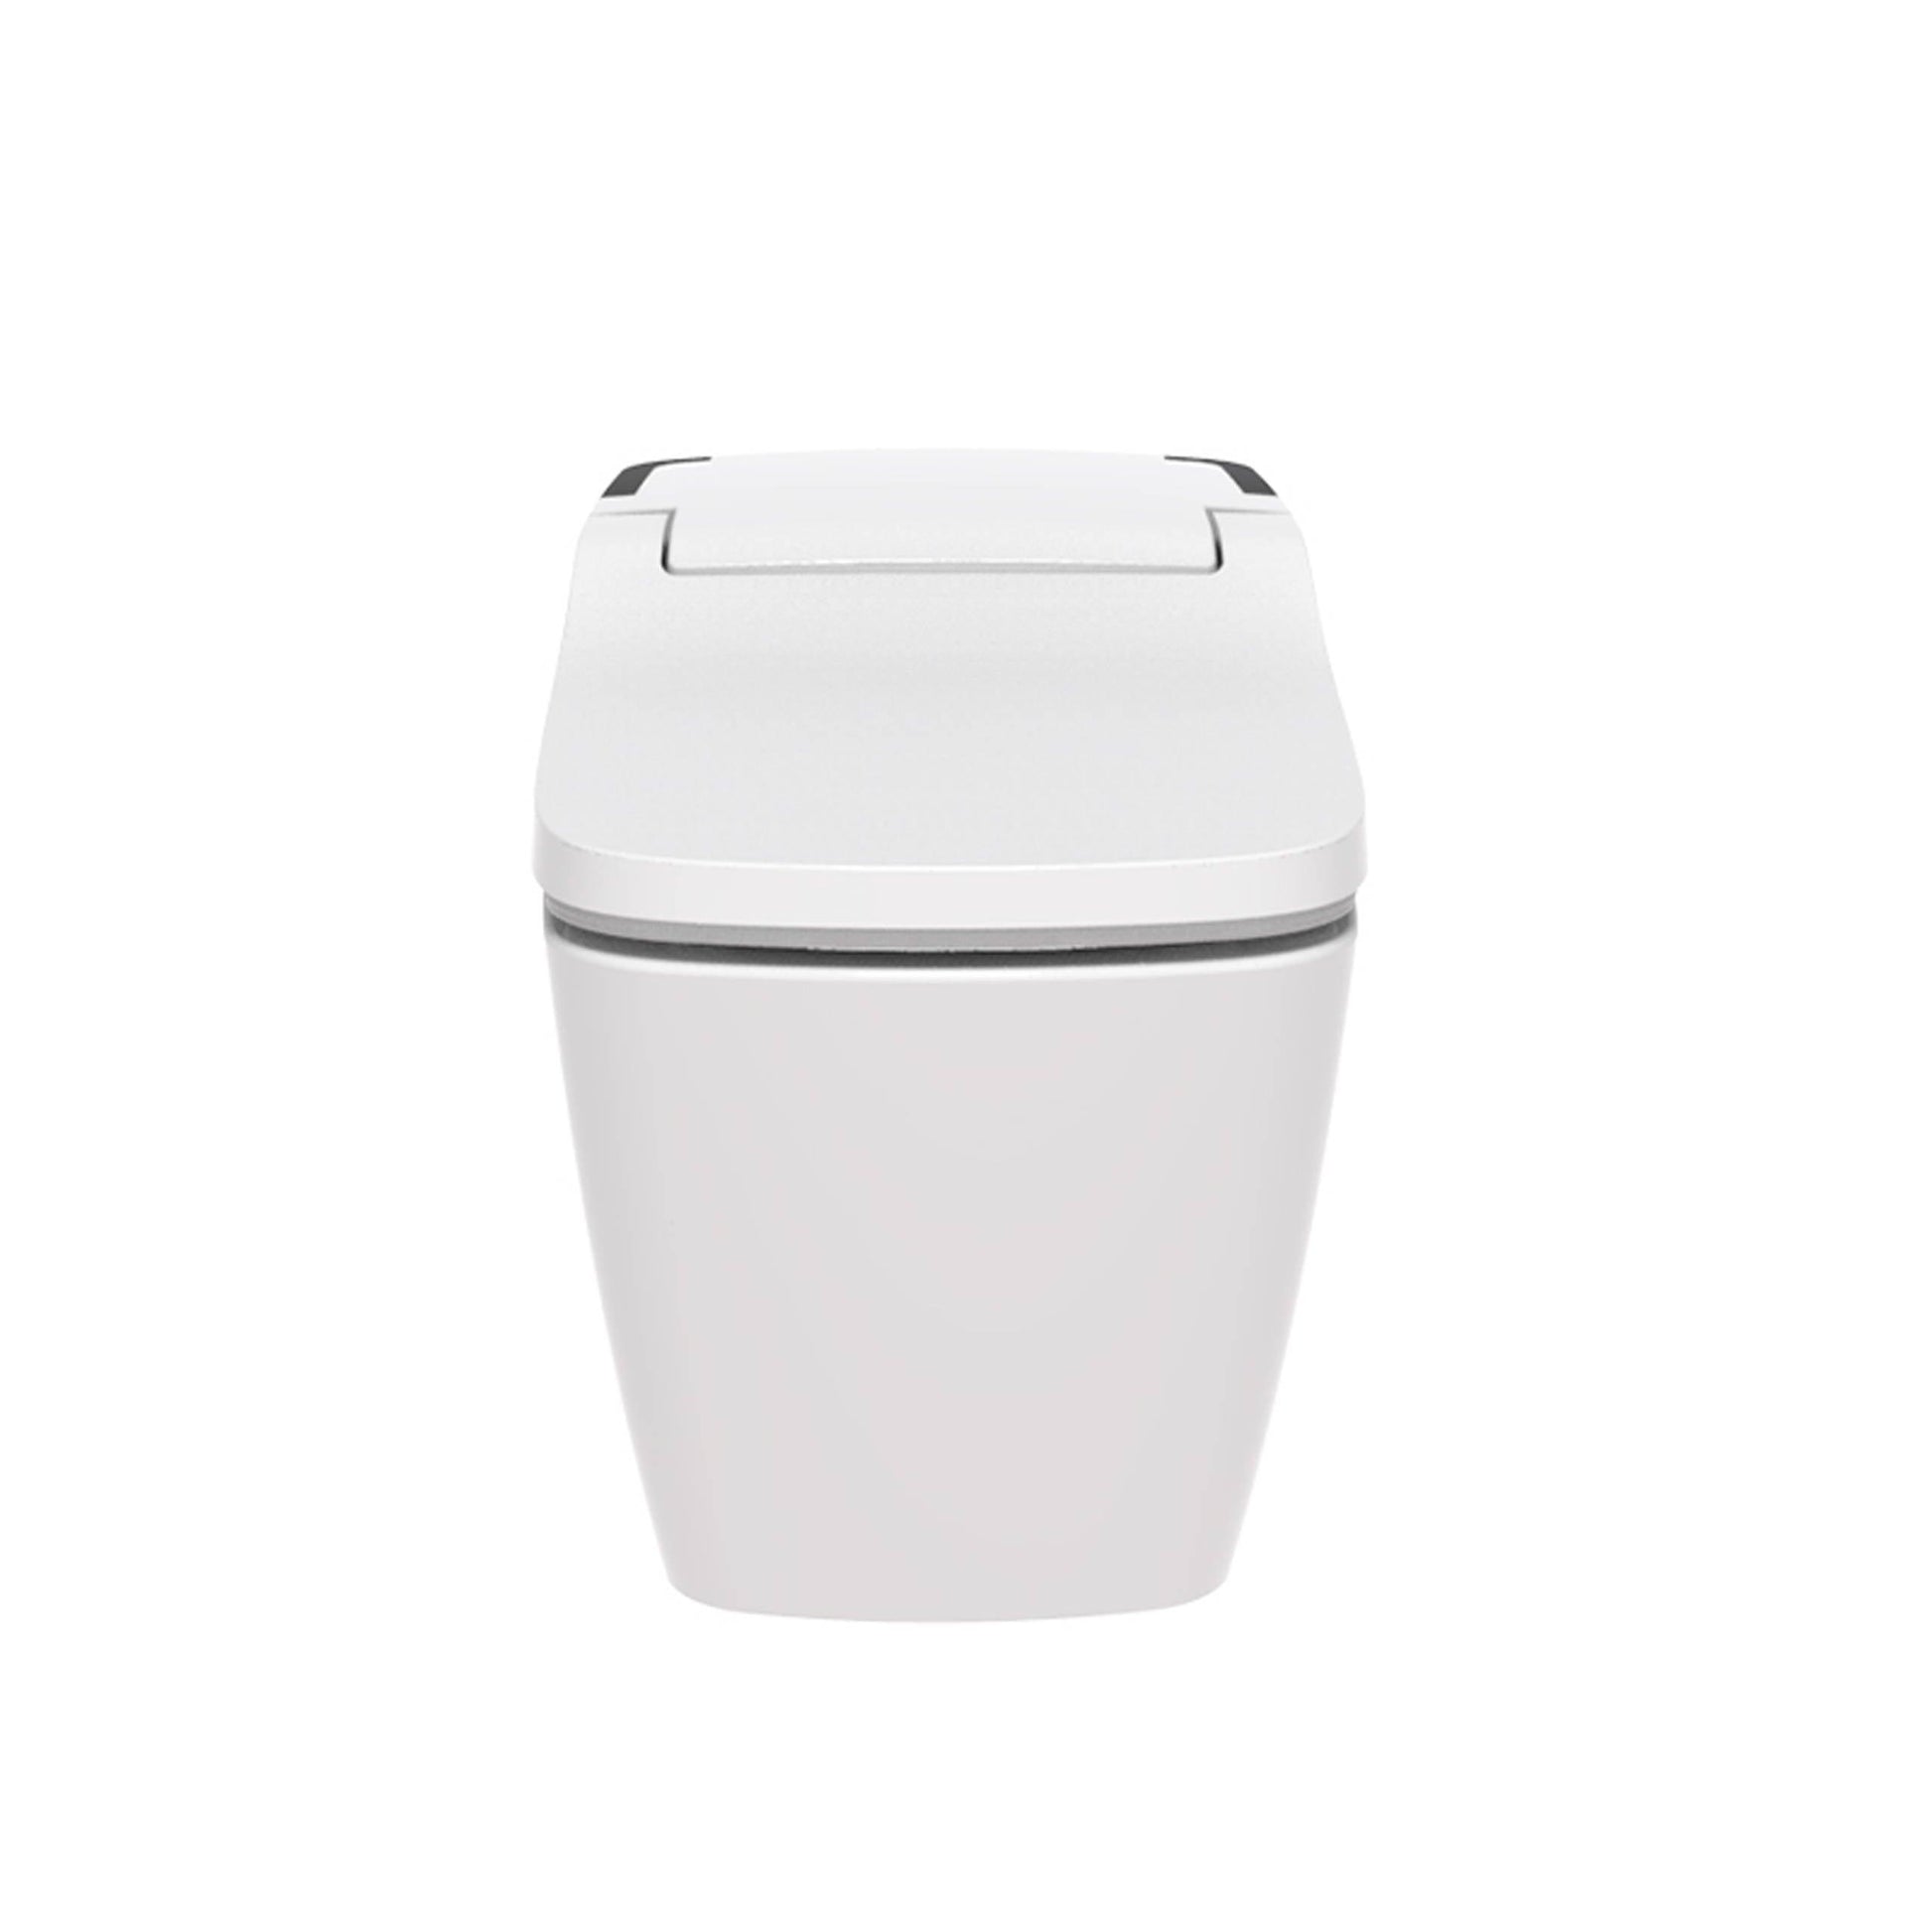 VOVO STYLEMENT TCB-090SA Bidet Toilet with Auto Open/Close Lid, Auto Dual Flush, Heated Seat, Warm Water and Dry, Made in Korea - YOURISHOP.COM